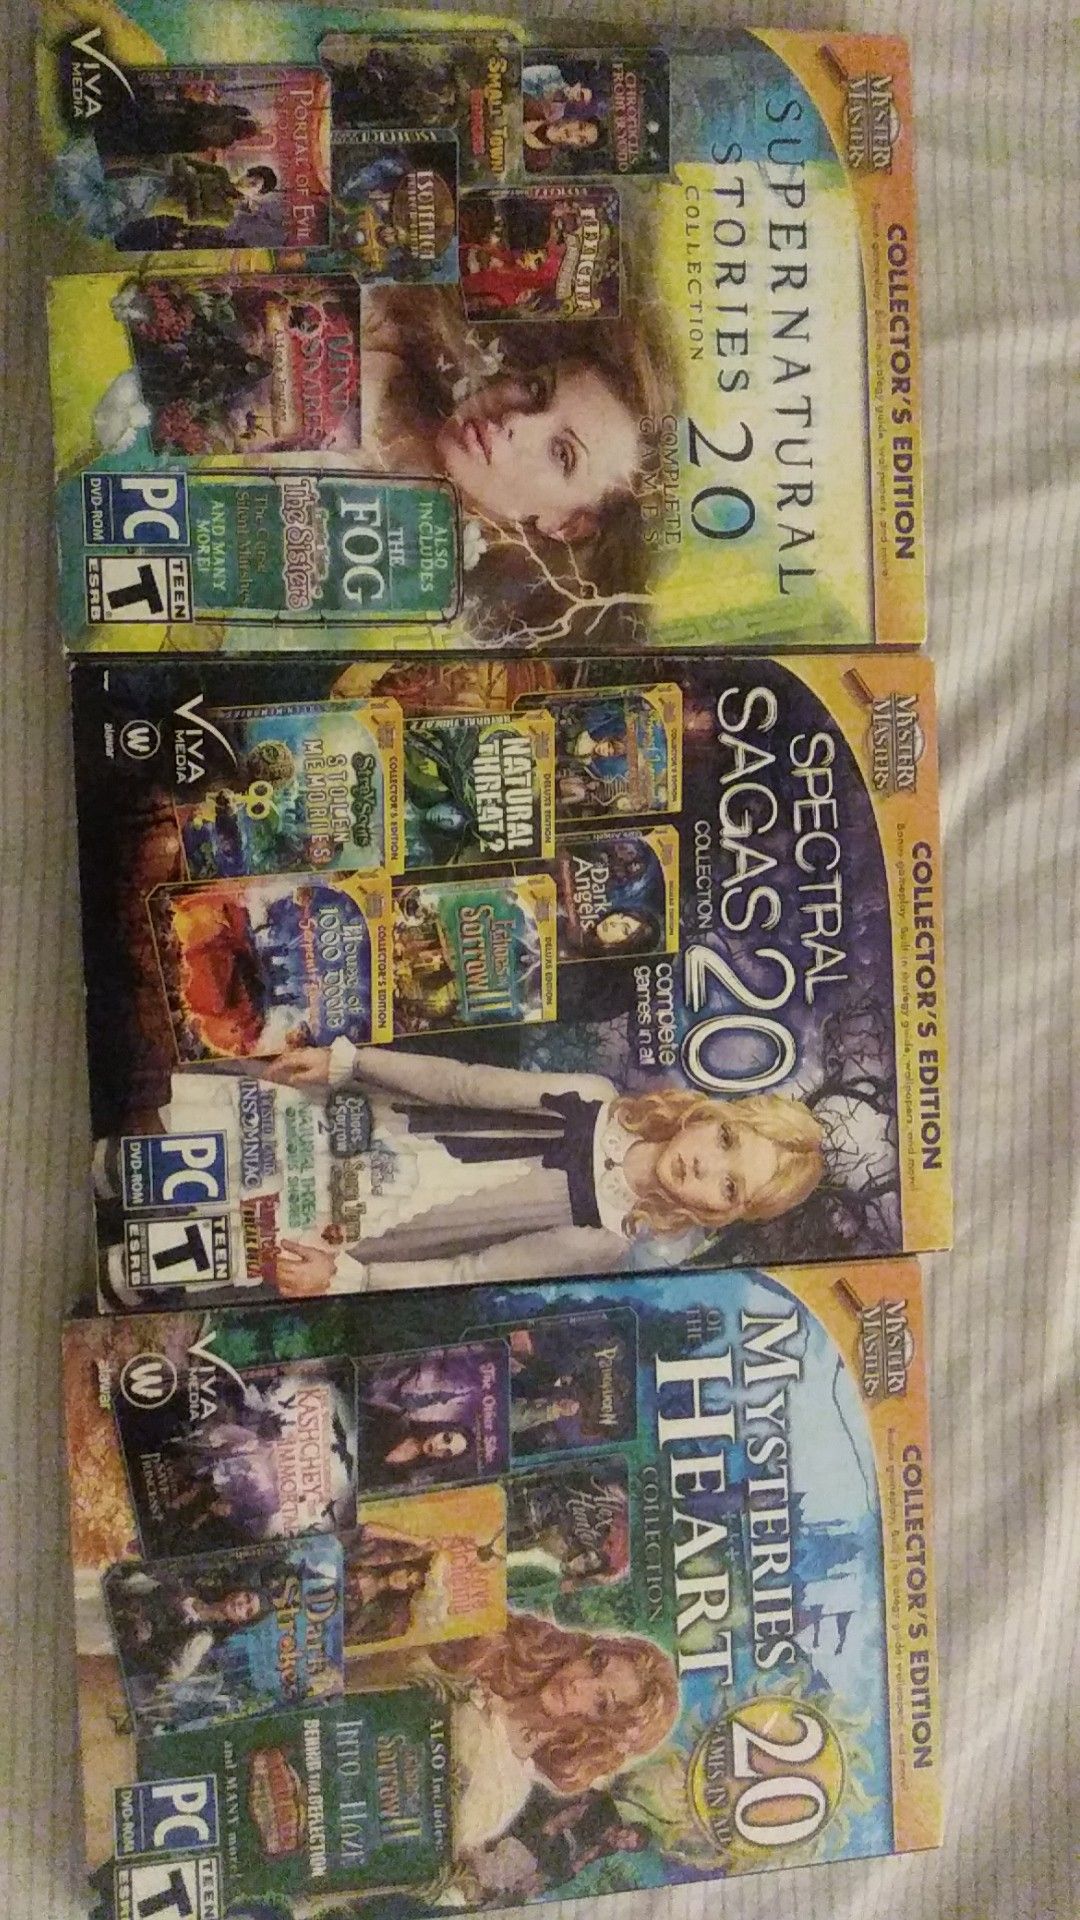 Mystery matters PC games sealed